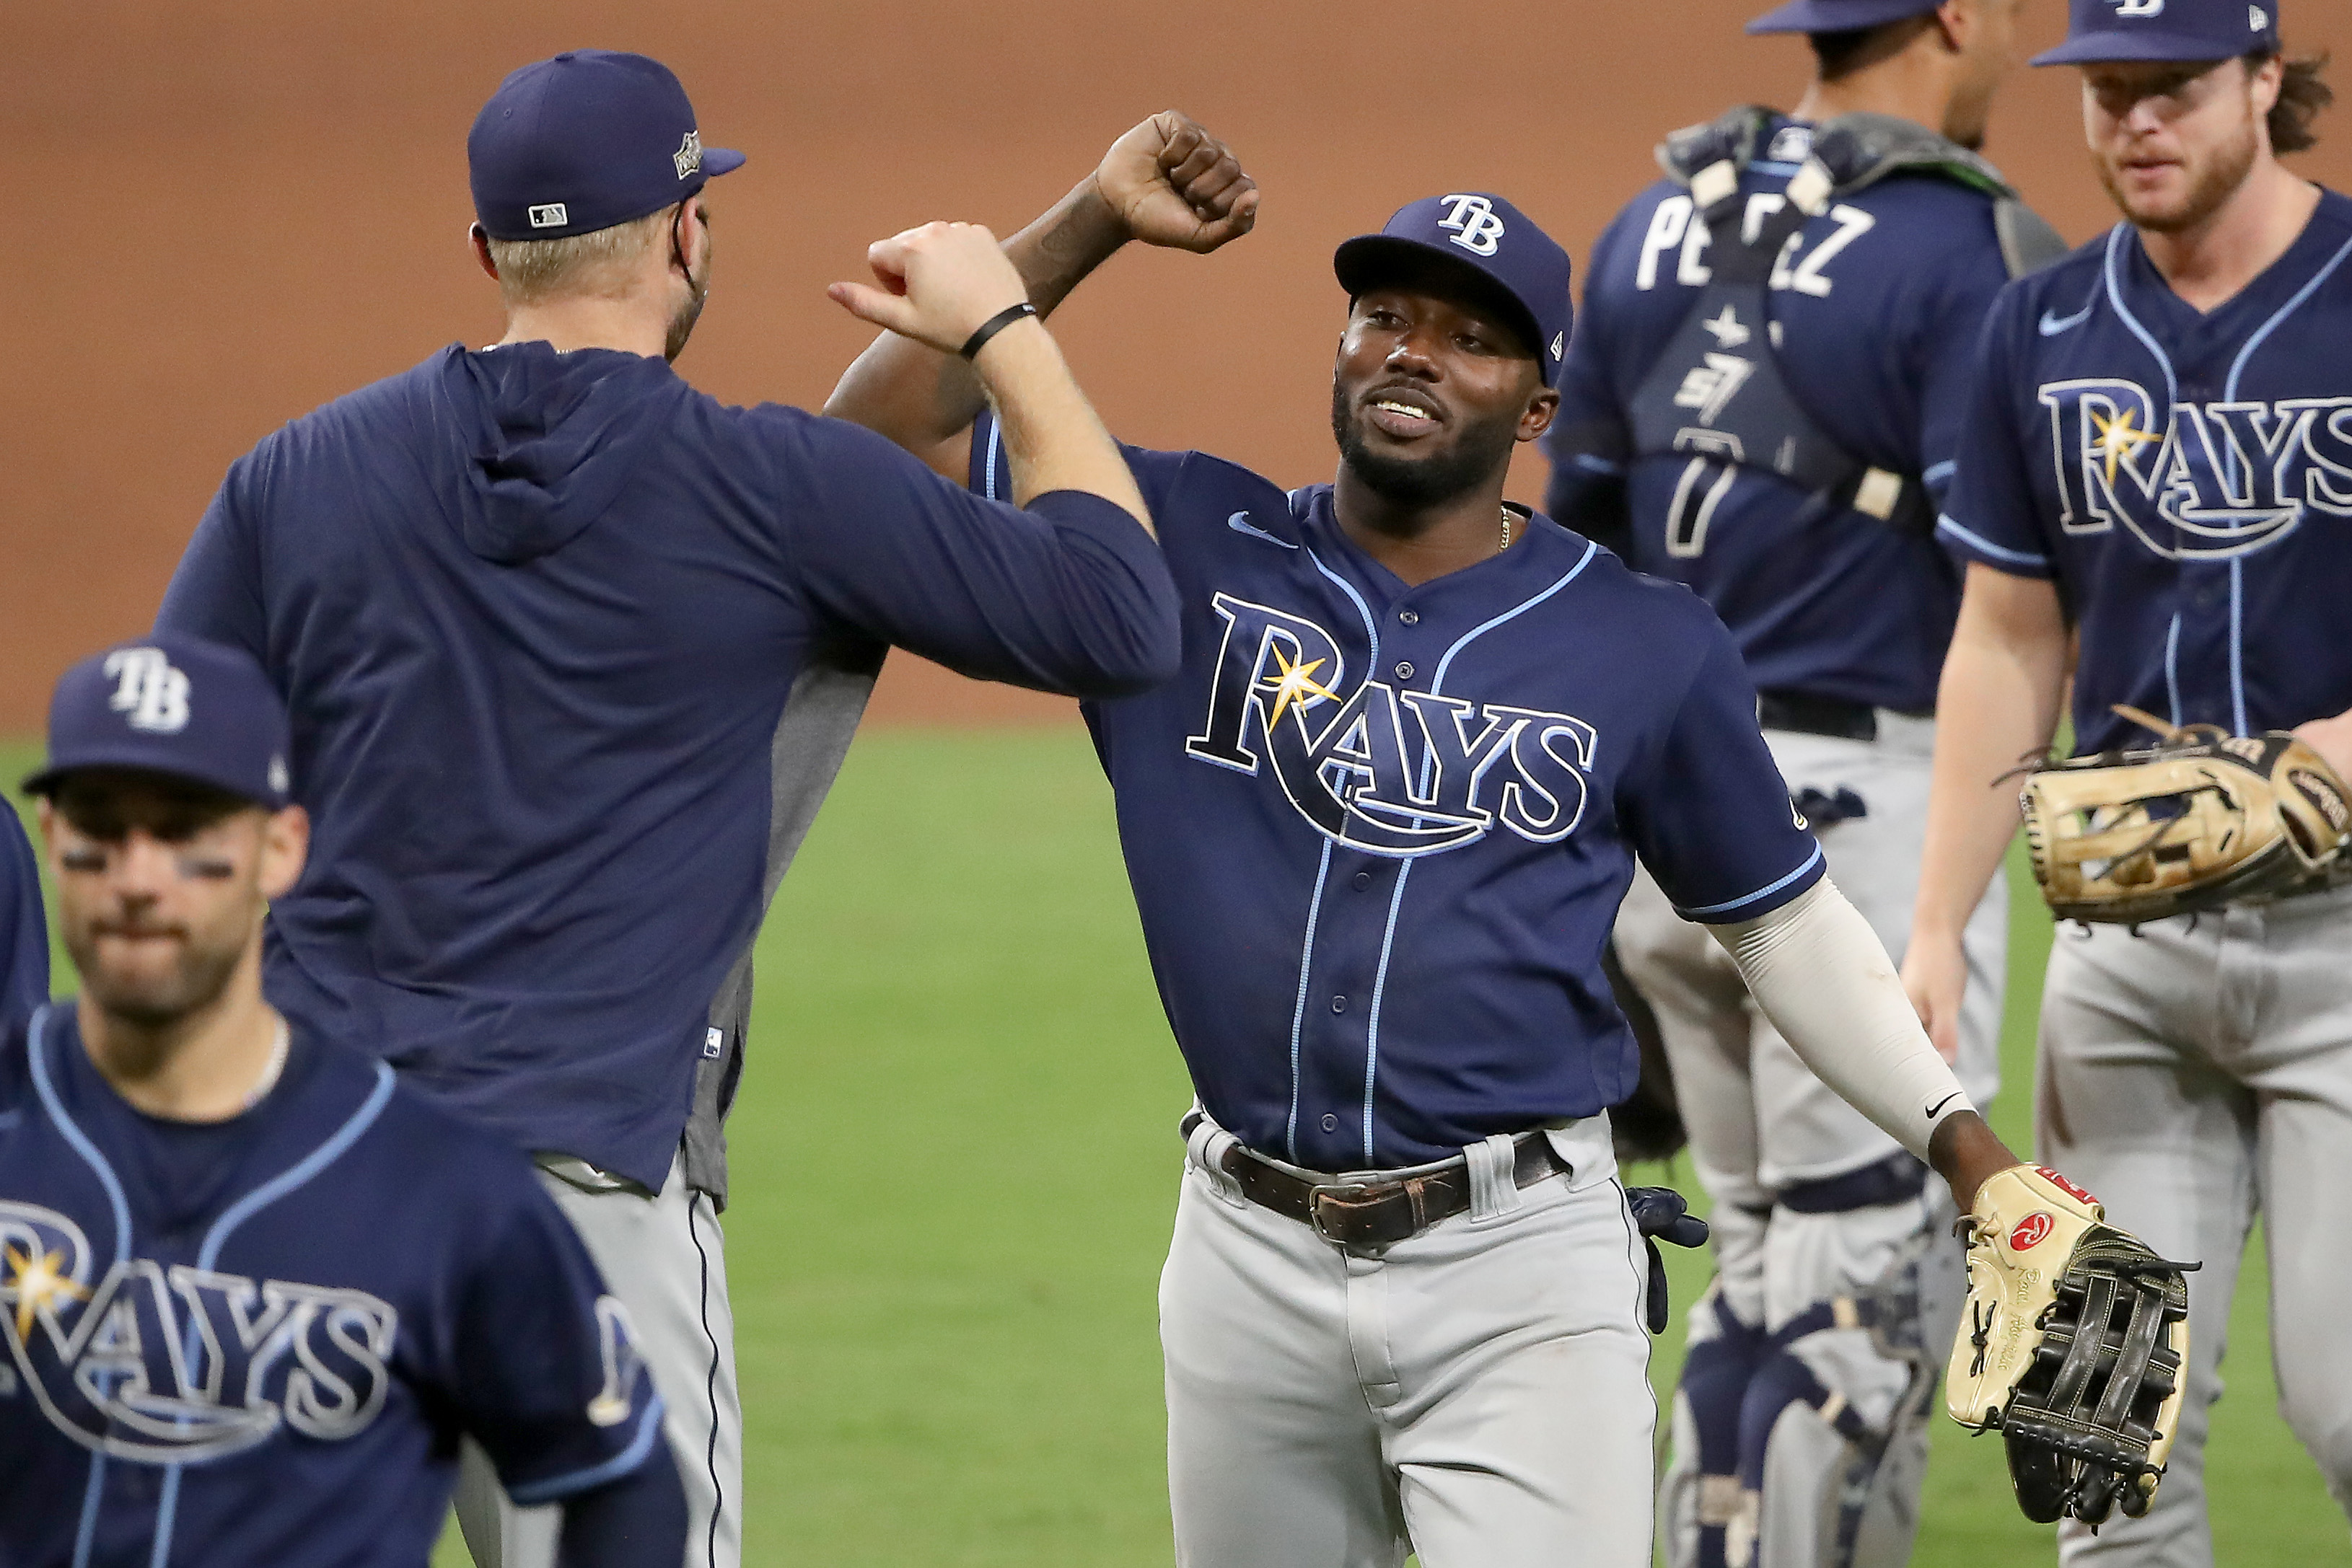 Arozarena homers again keeping Tampa Bay Rays as the only